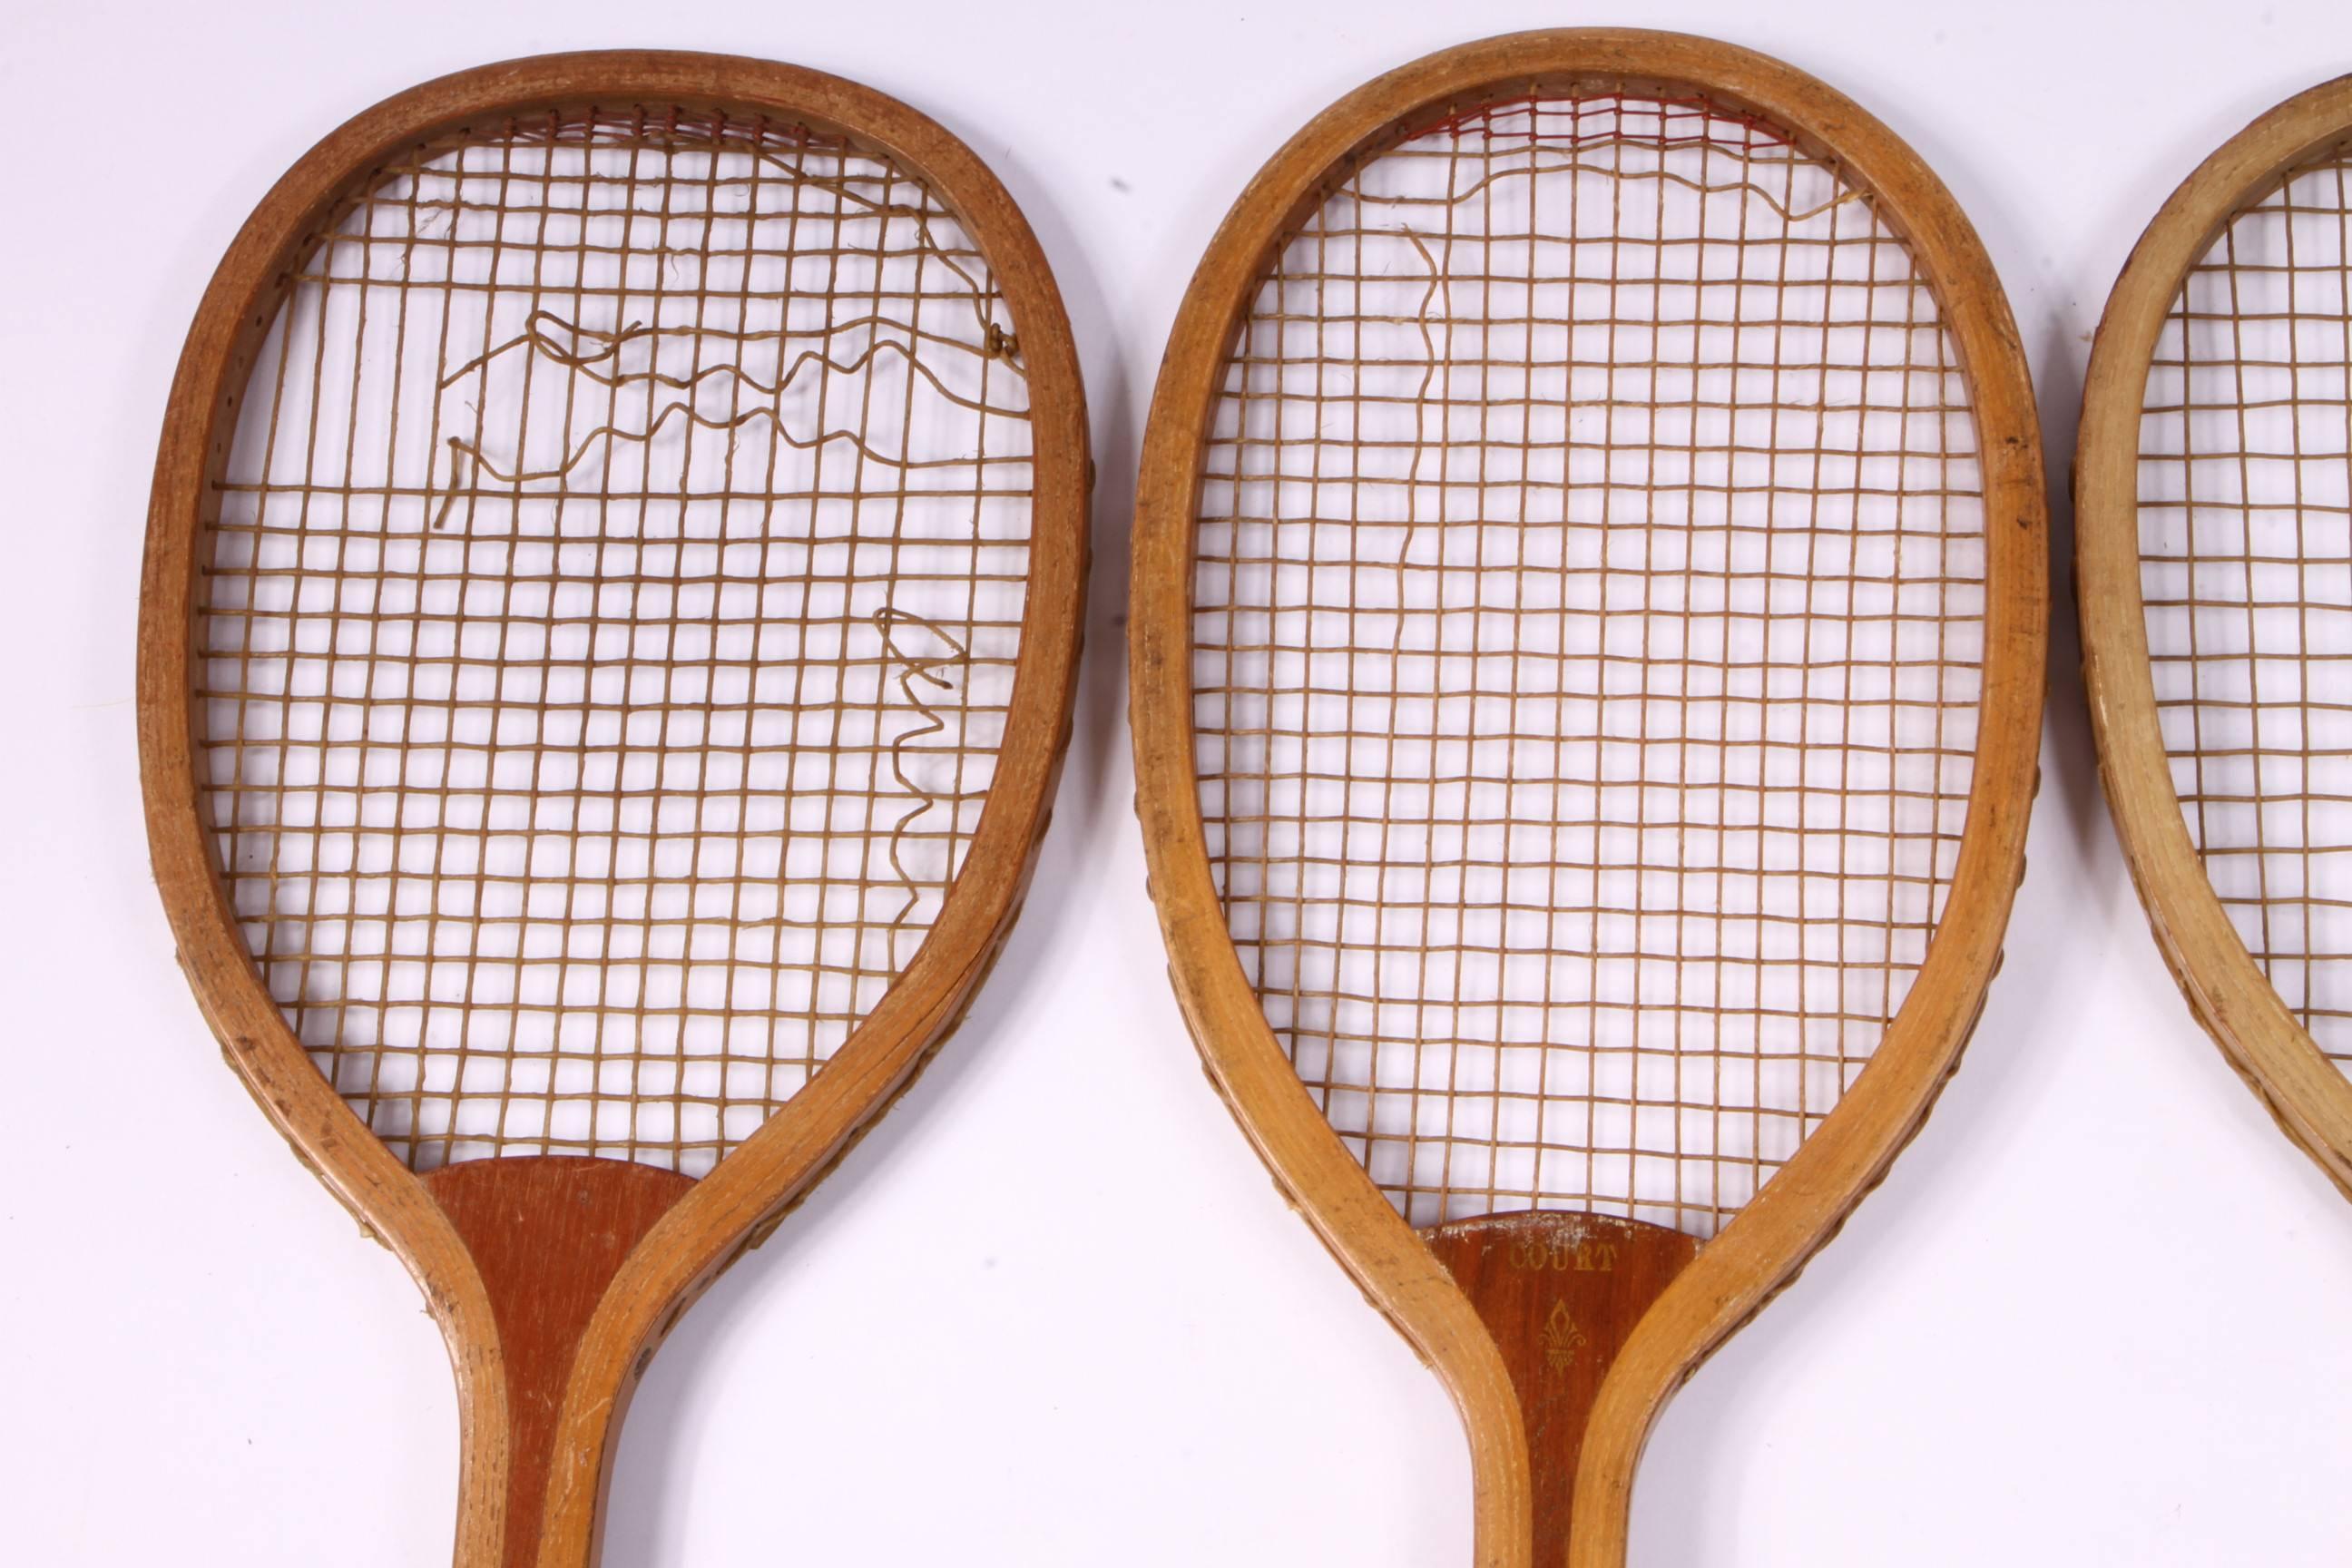 American Collection of 16 Vintage Tennis Rackets